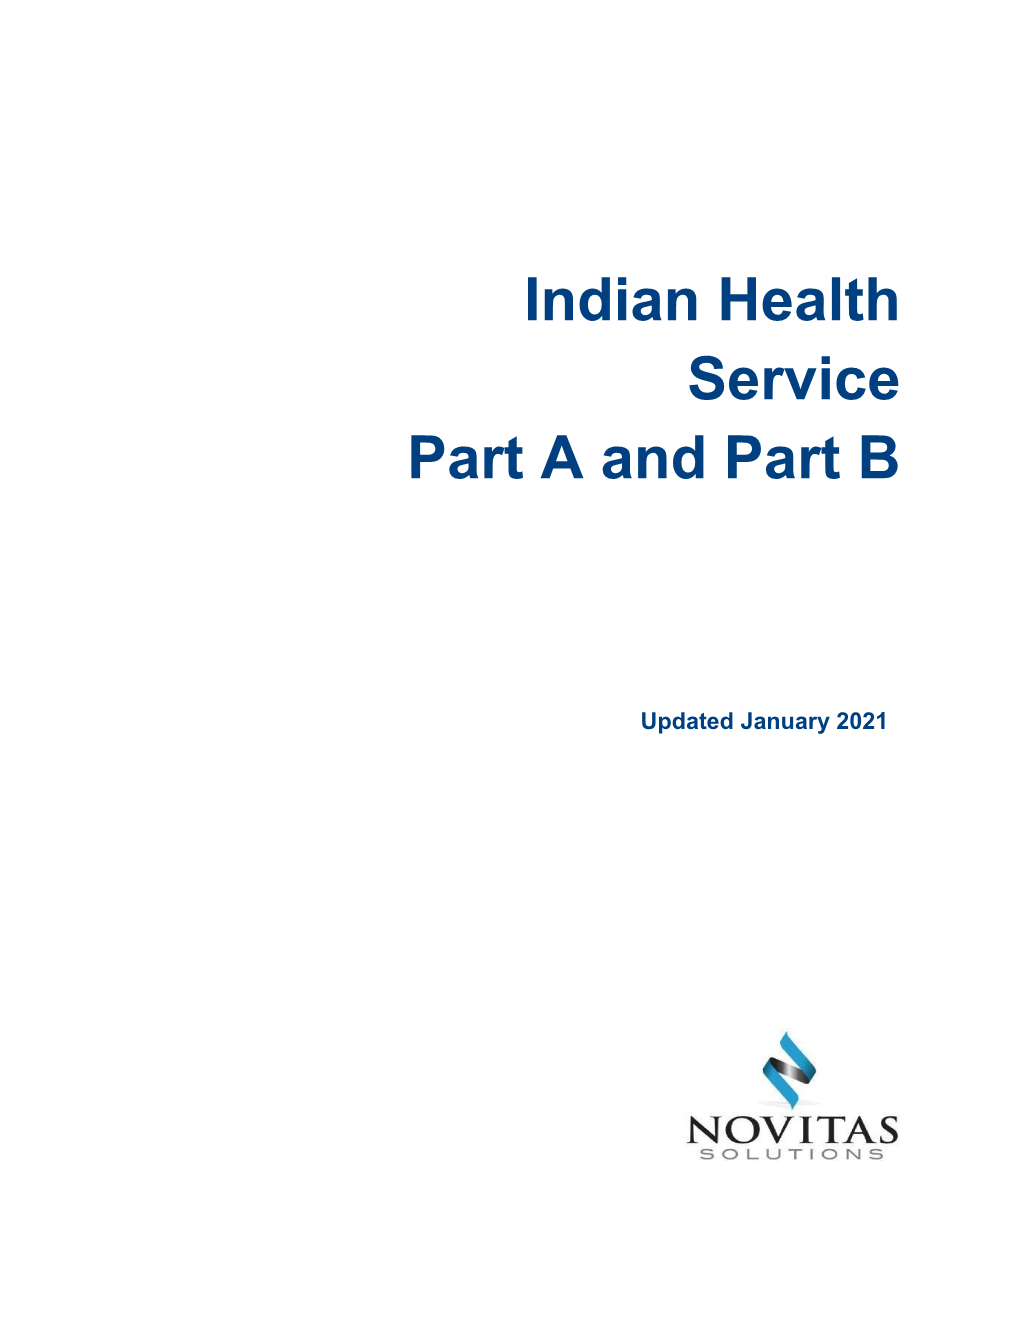 Indian Health Service Part a and Part B